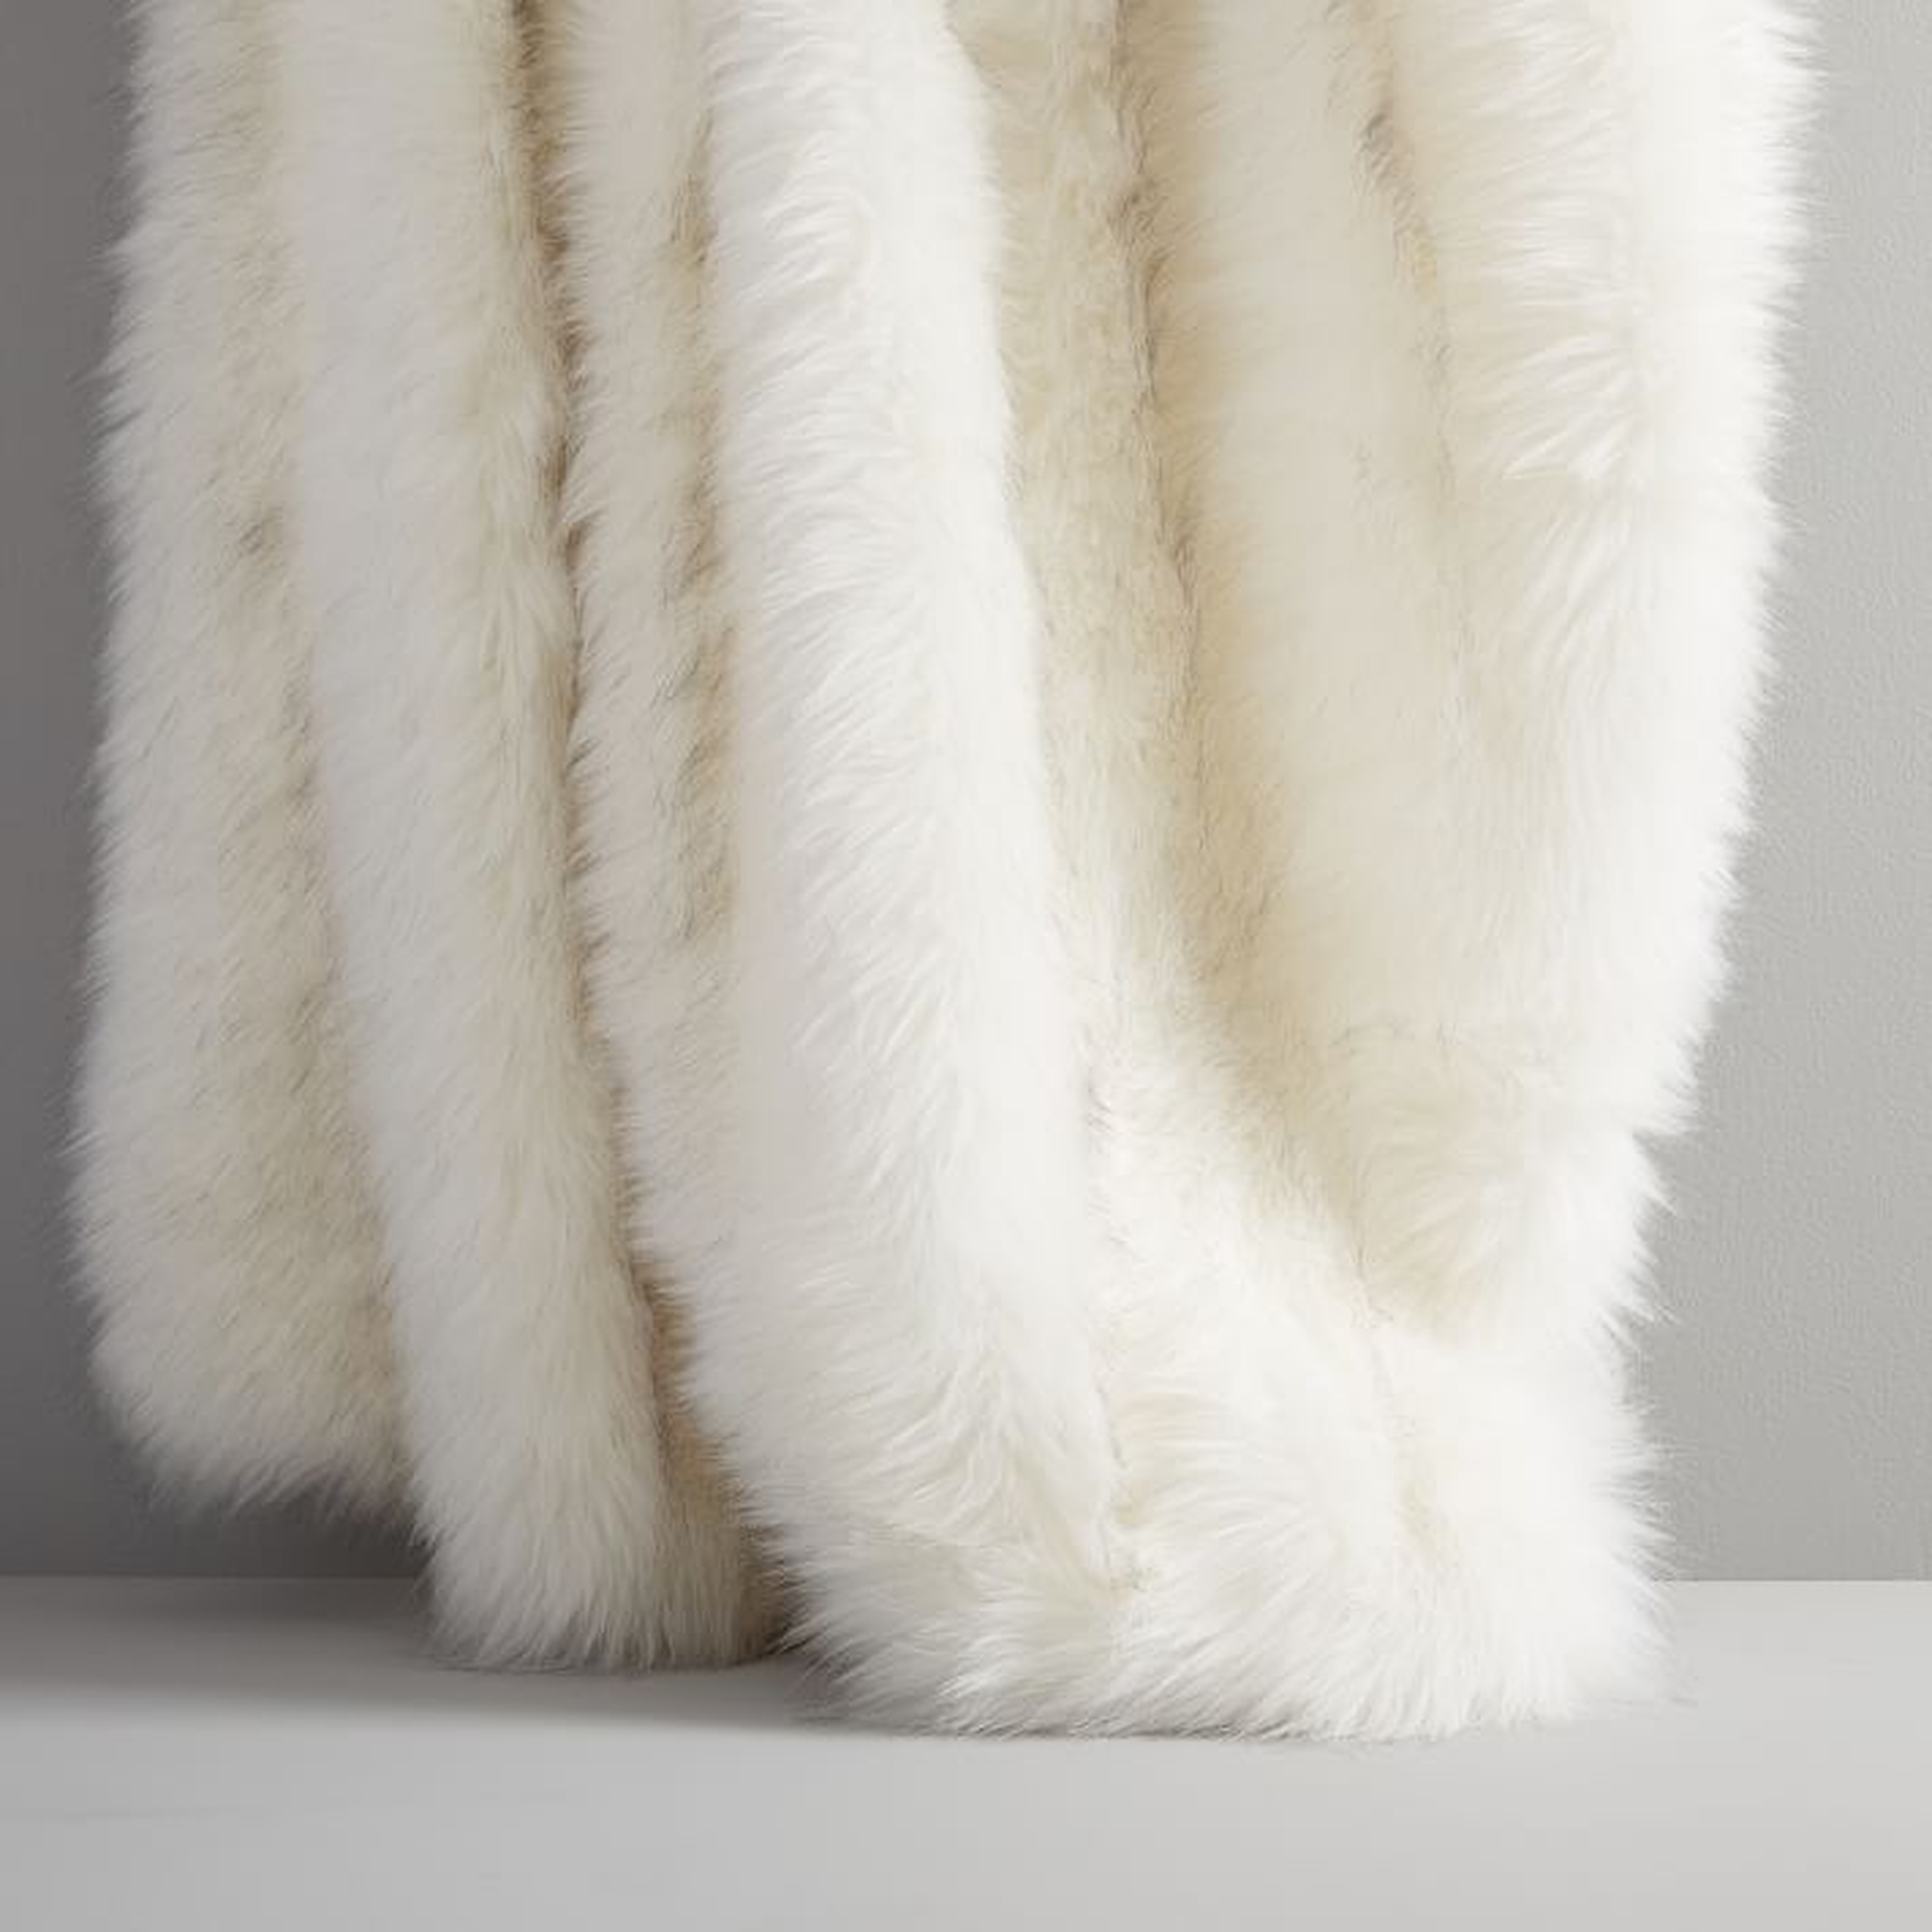 Faux Fur Brushed Tips Throw, 47"x60", Stone White - West Elm